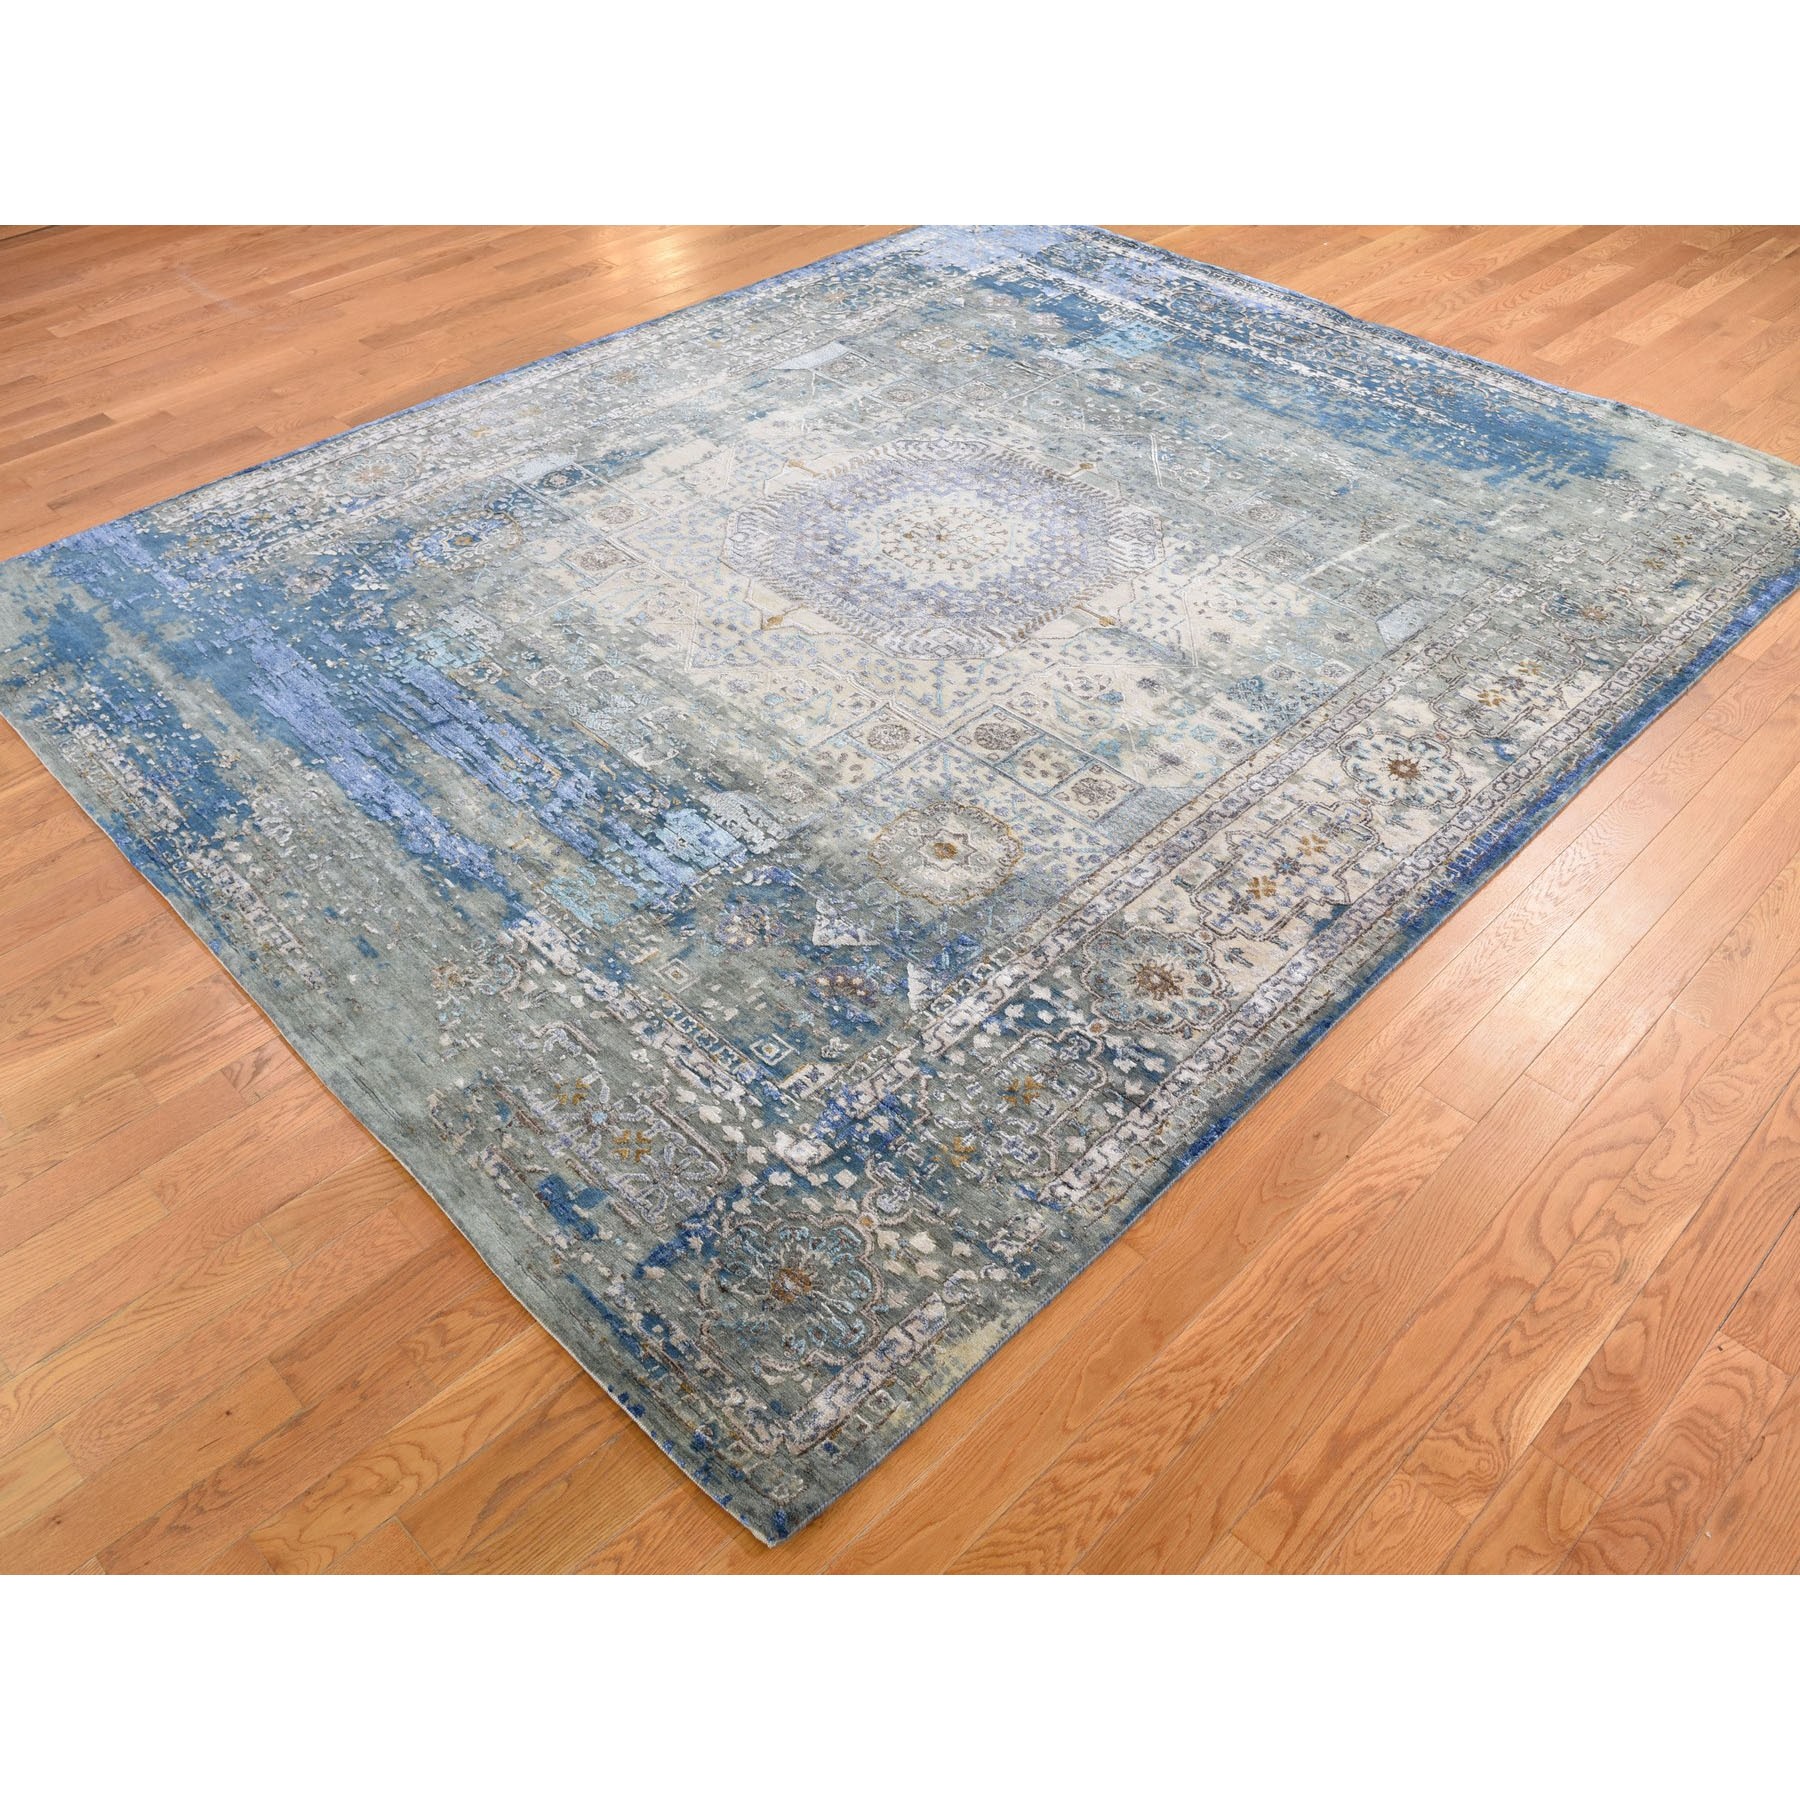 8-x9-10  Silk With Textured Wool Hi-Low Pile Mamluk Design Hand Knotted Fine Oriental Rug 